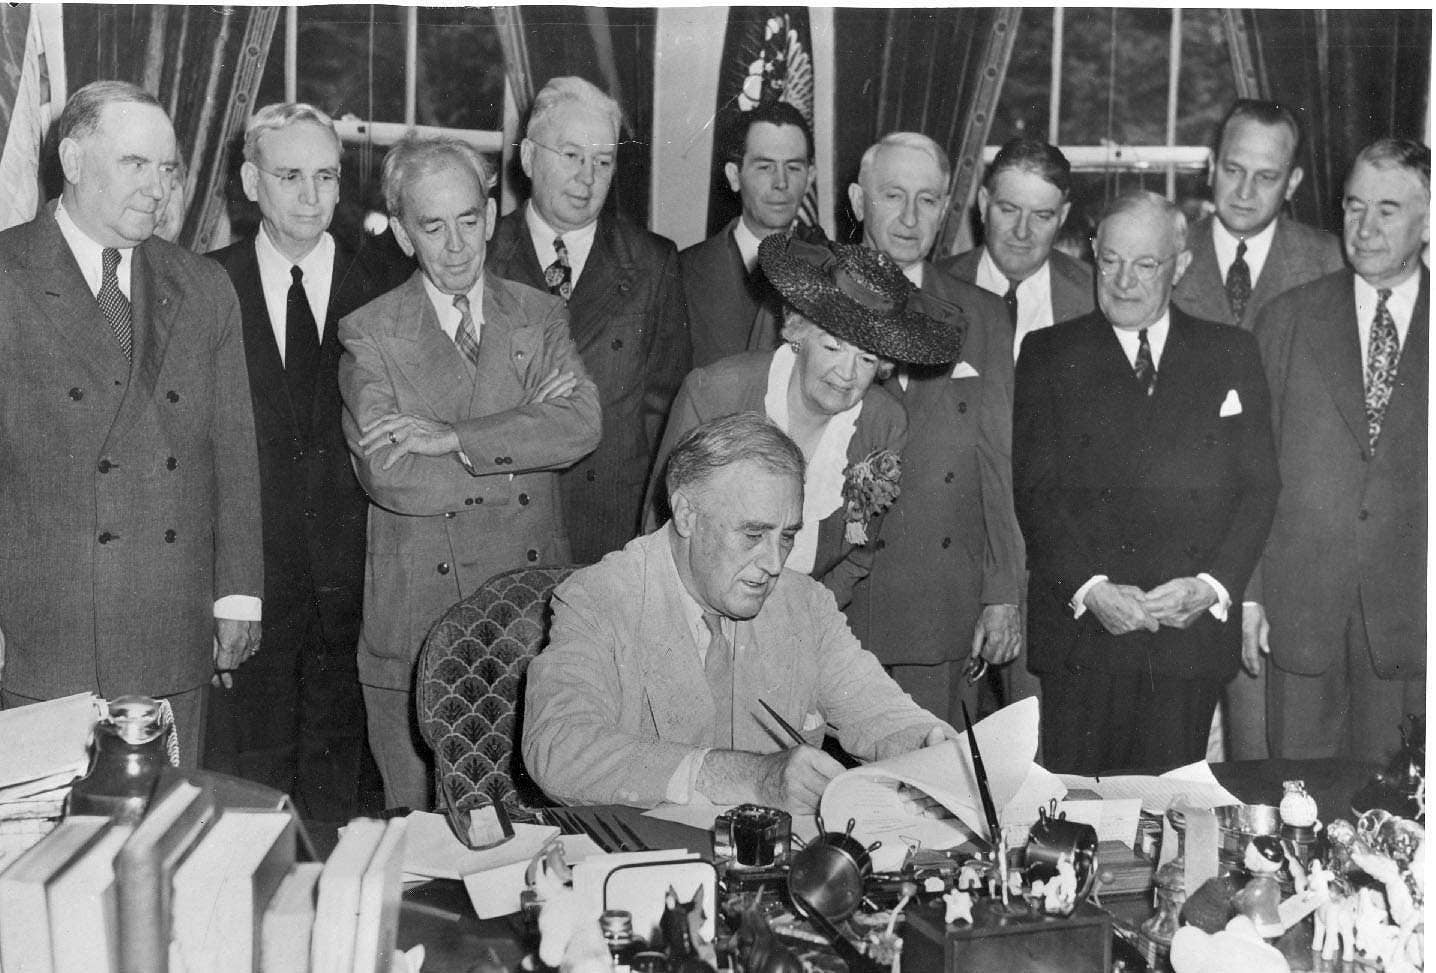 President Roosevelt signs the GI Bill in Washington DC in 1944. (Photo: White House archives)